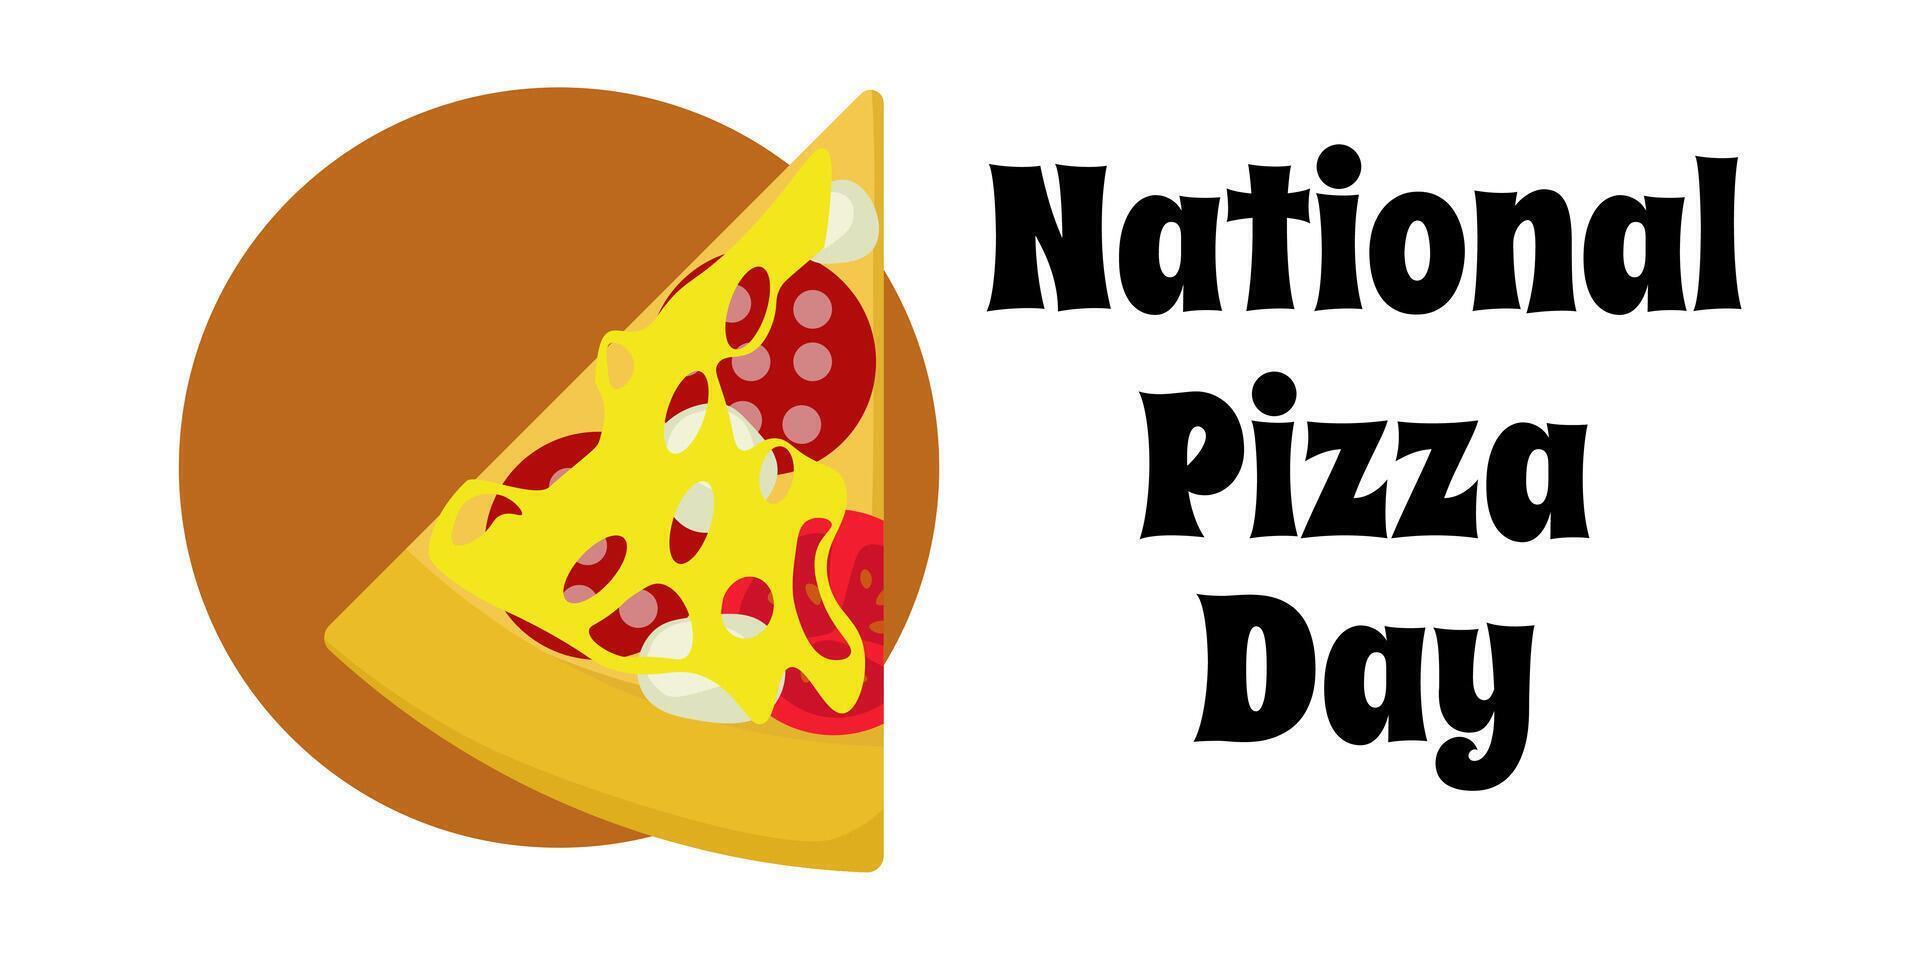 National Pizza Day, simple food poster or horizontal banner design idea vector